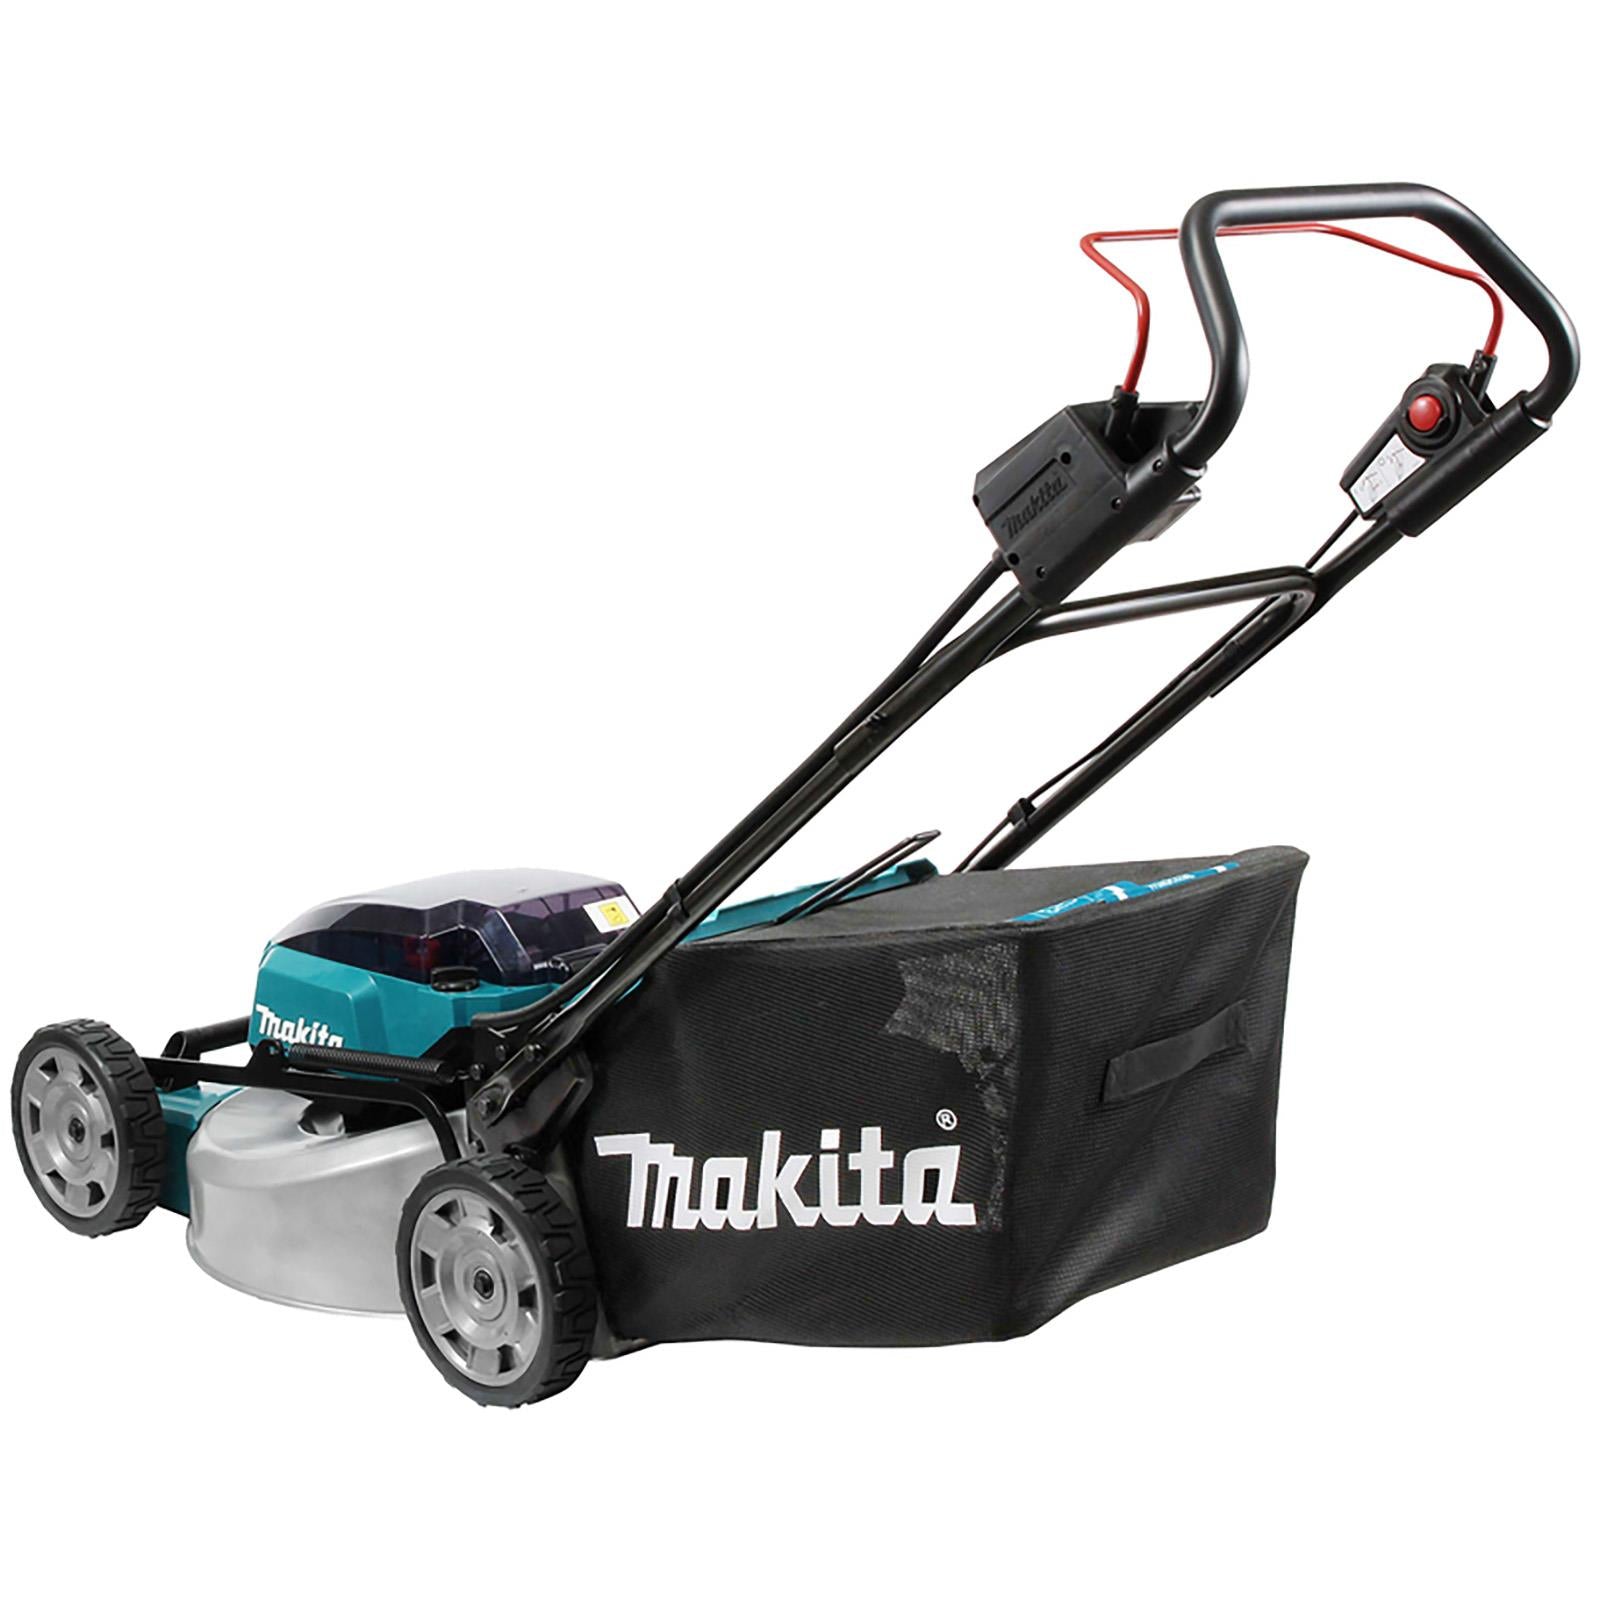 Makita 53cm Lawn Mower Kit Twin 18V LXT Li-ion Cordless Garden Grass Outdoor 4 x 5Ah Battery and Dual Rapid Charger DLM530PT4